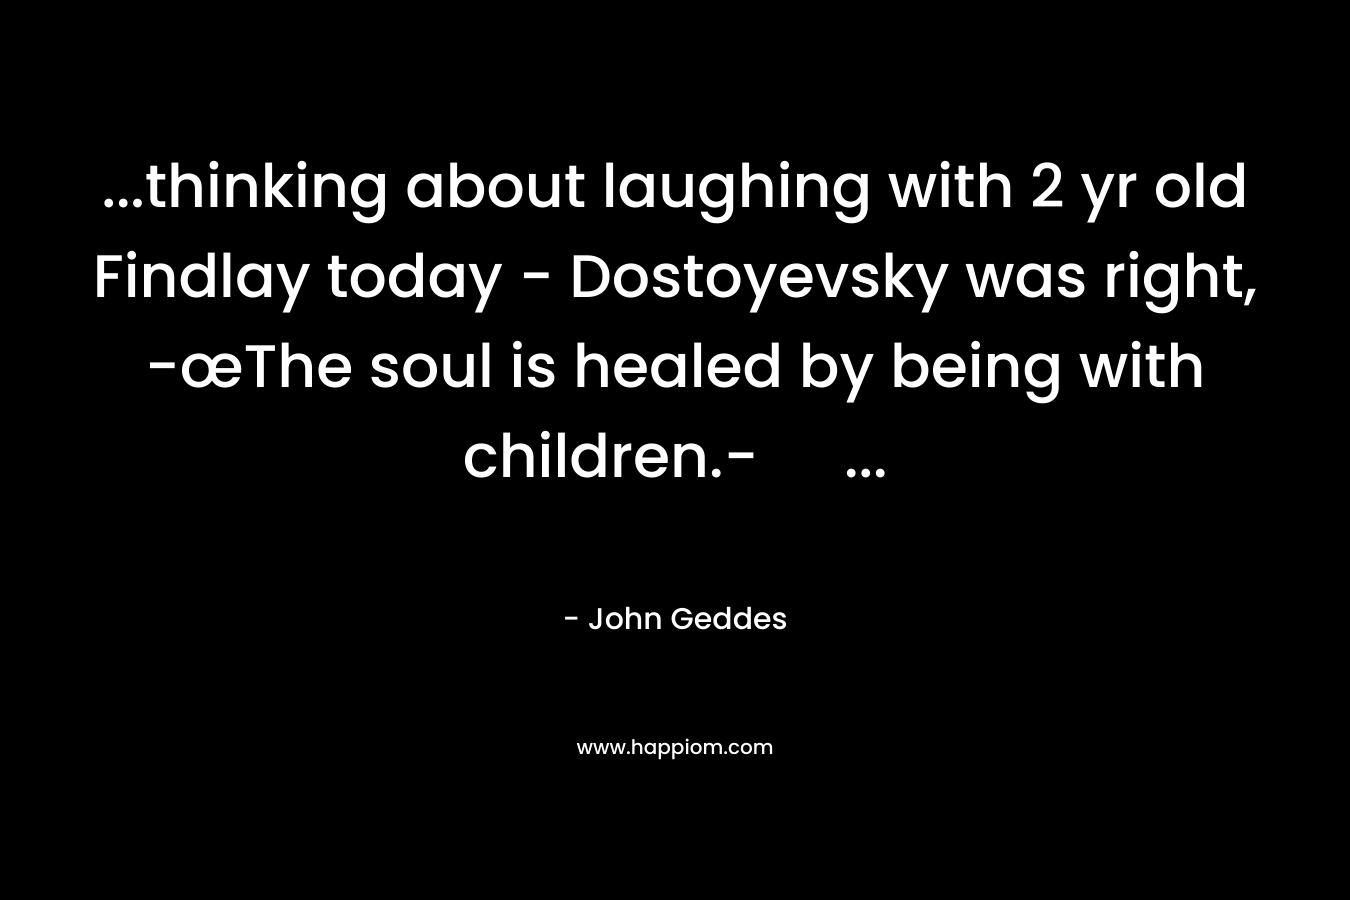 …thinking about laughing with 2 yr old Findlay today – Dostoyevsky was right, -œThe soul is healed by being with children.- … – John Geddes